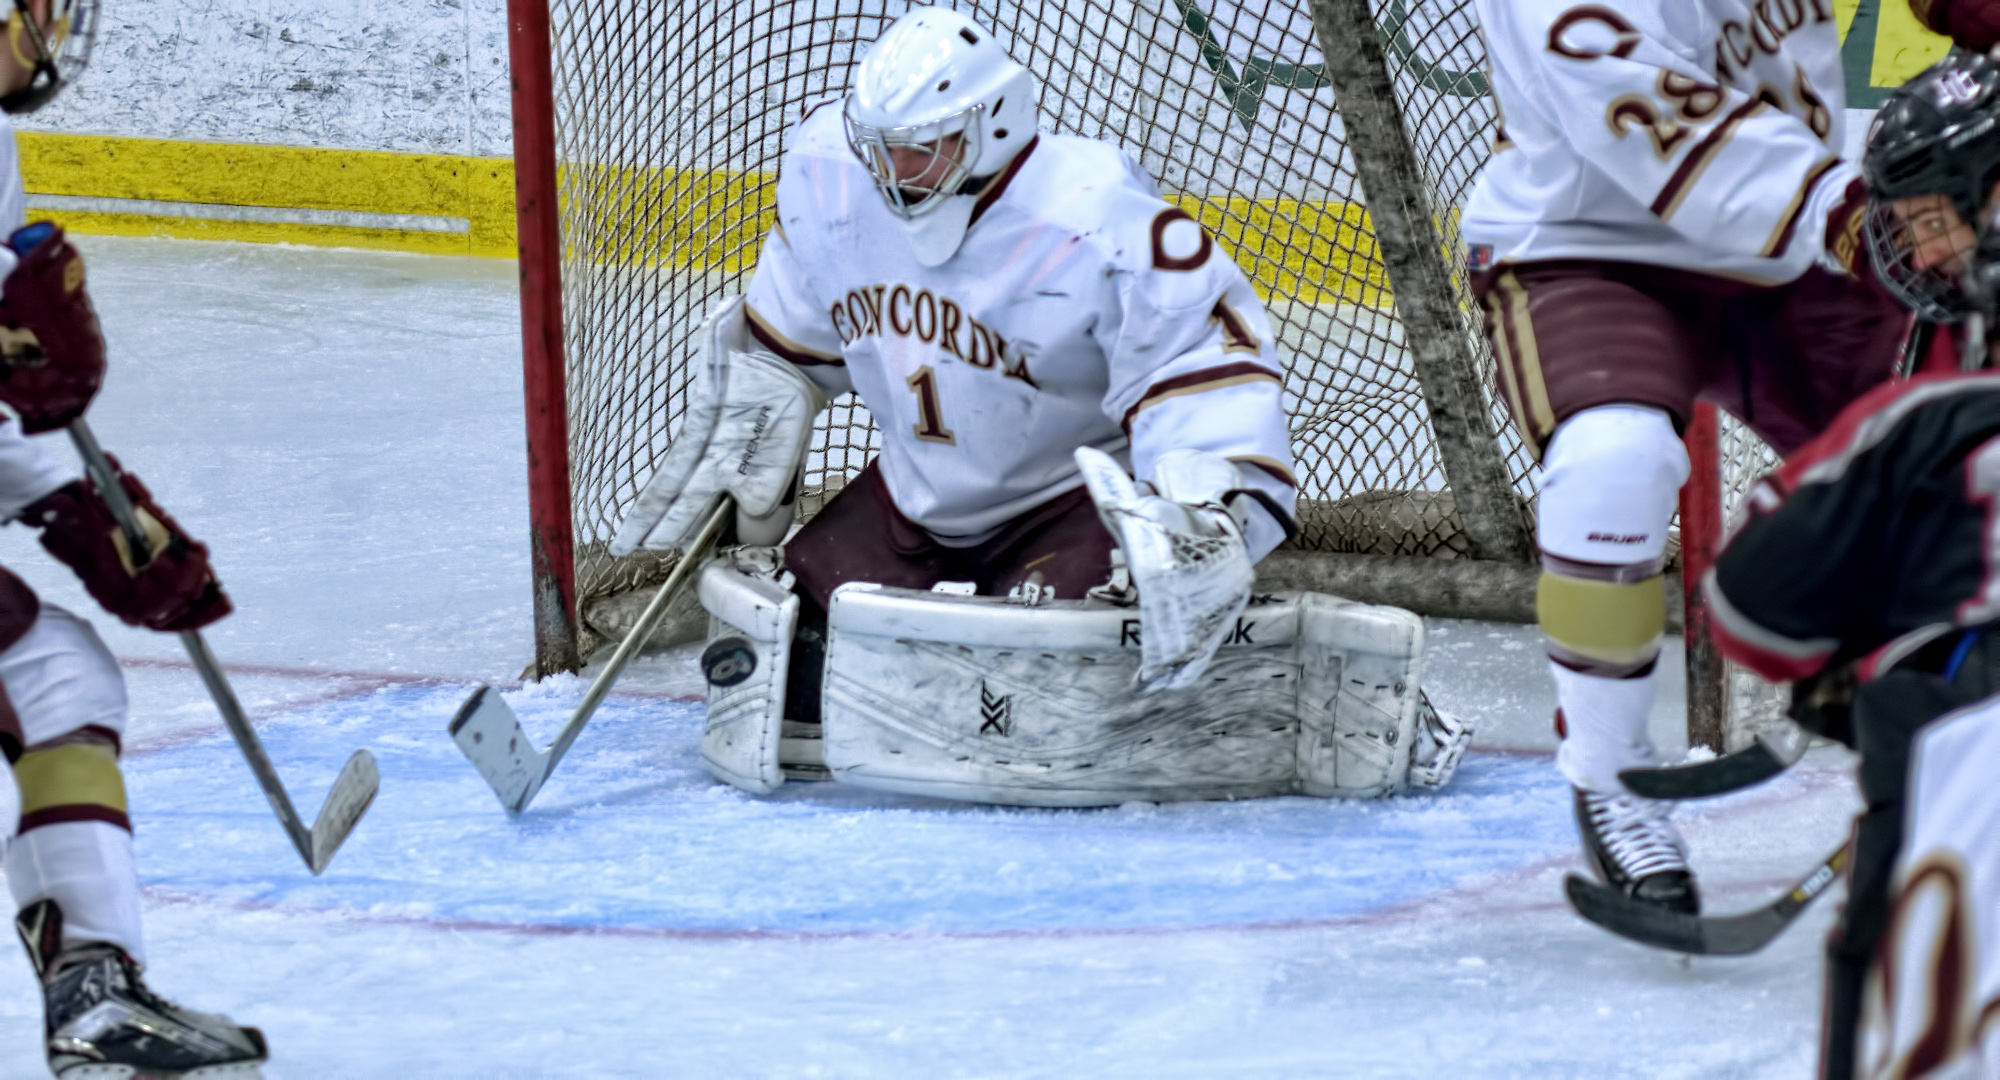 Sophomore Jacob Stephan made 21 saves in the Cobbers' season-opening overtime tie against Gustavus.